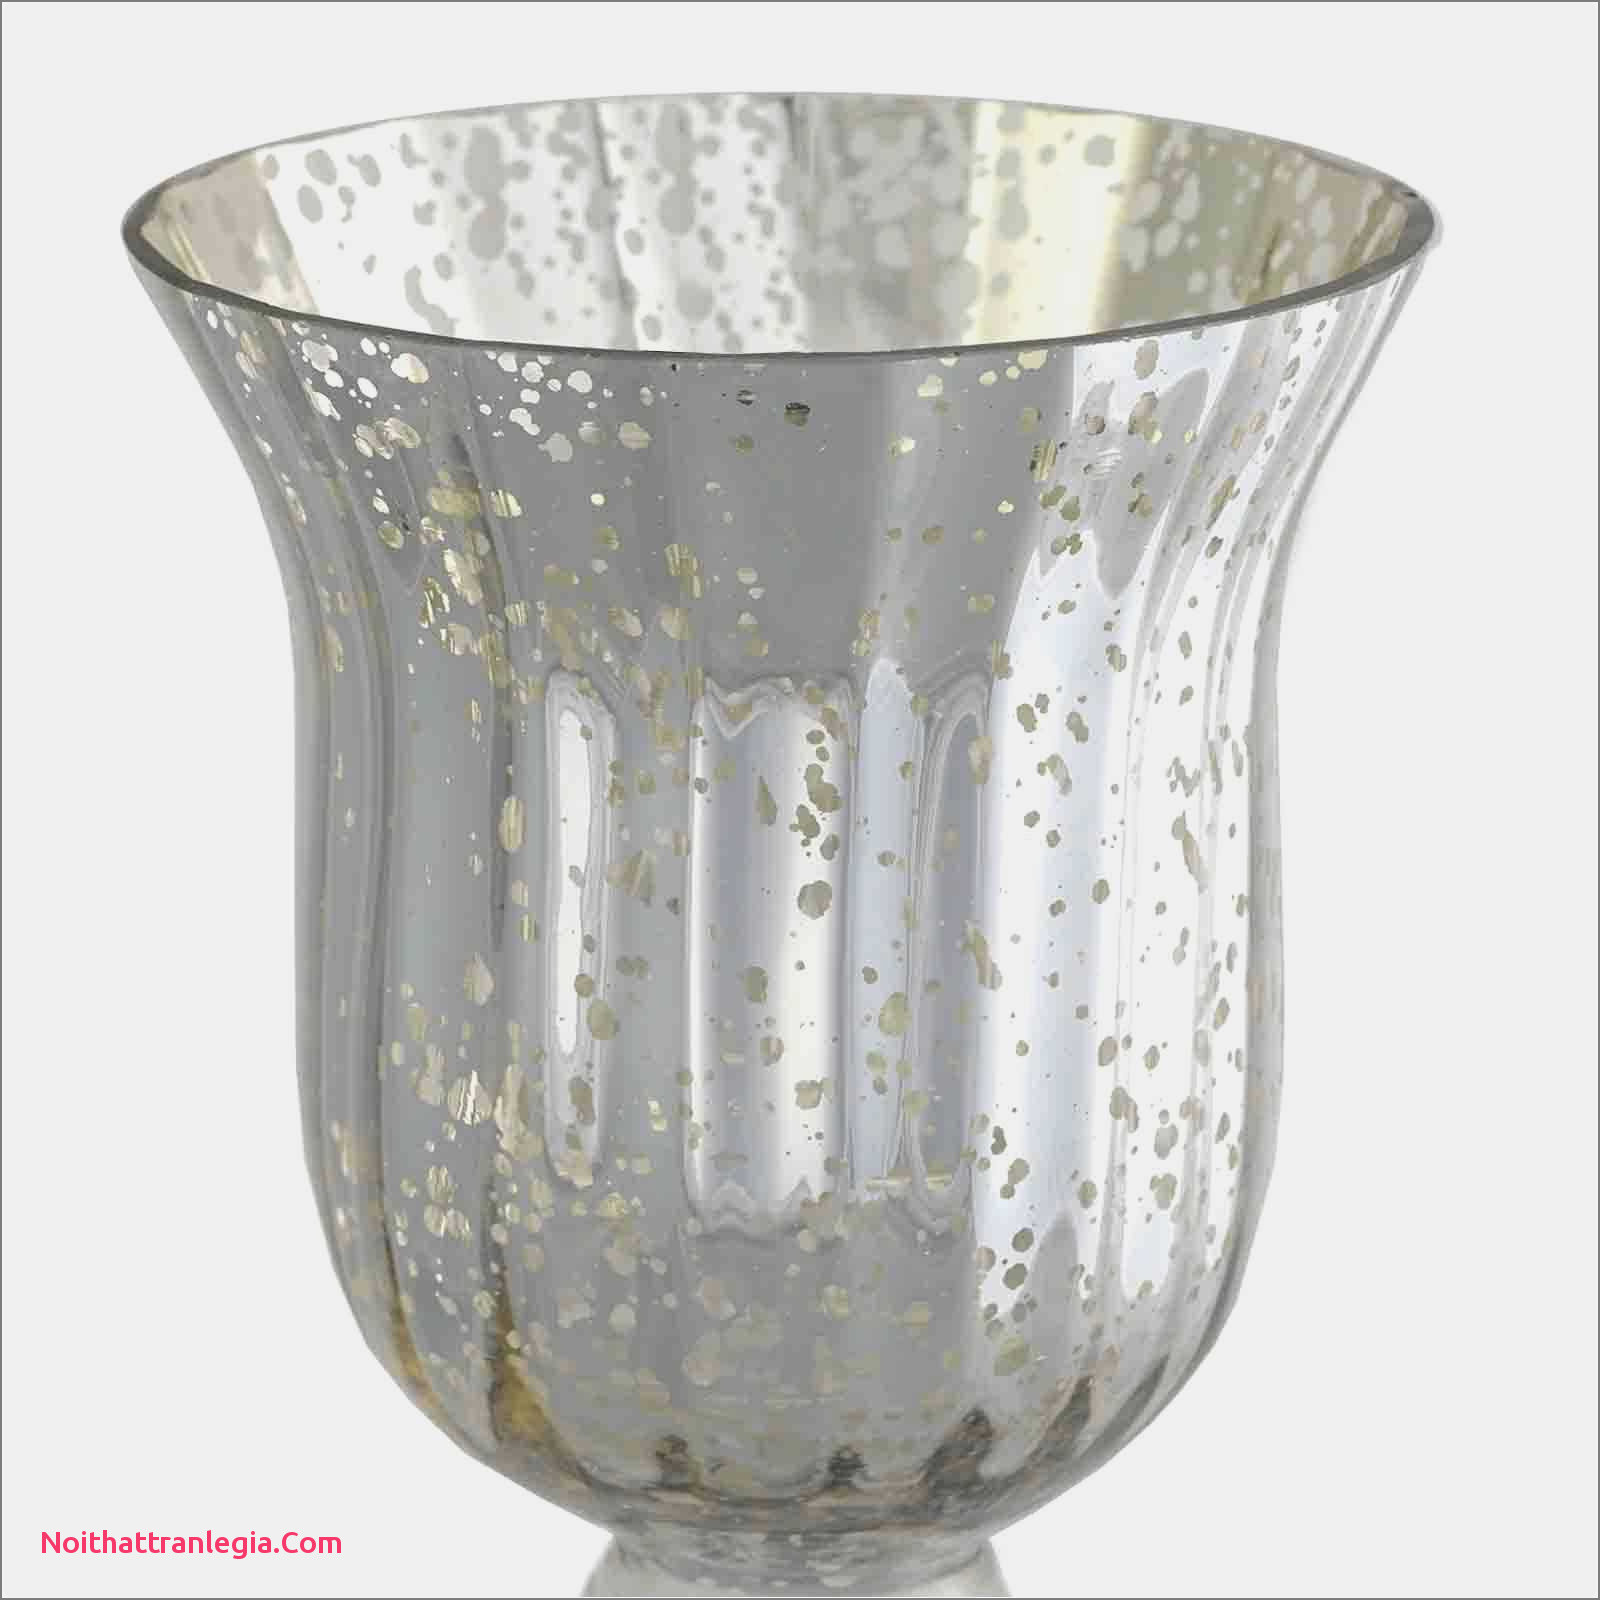 11 Unique Small Decorative Glass Vases 2024 free download small decorative glass vases of 20 wedding vases noithattranlegia vases design in wedding guest gift ideas inspirational candles for wedding favors superb pe s5h vases candle vase i